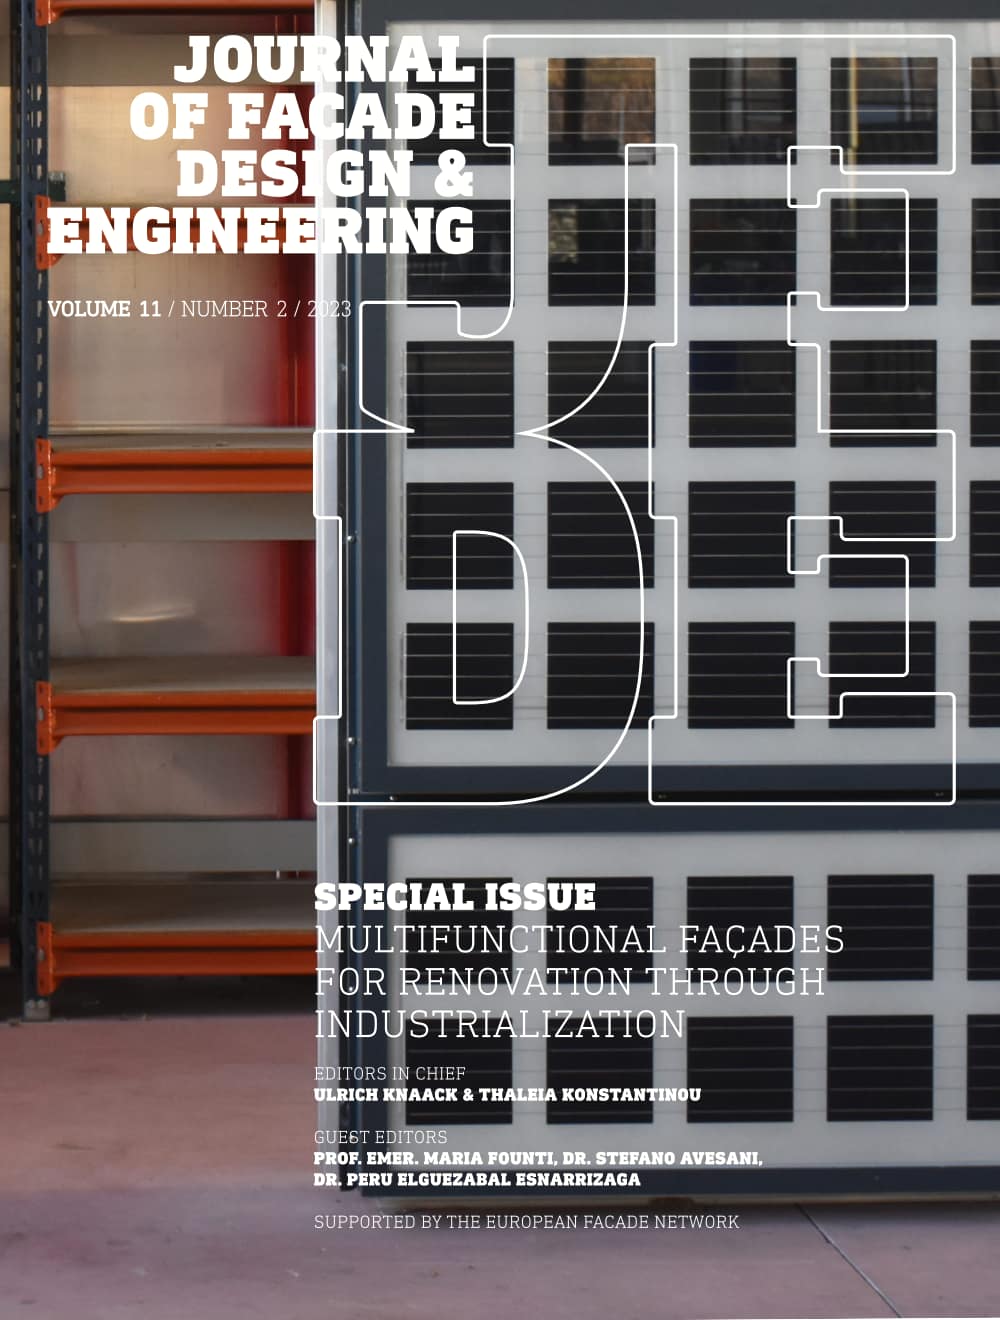 Special Issue Multifunctional Façades for Renovation through Industrialization